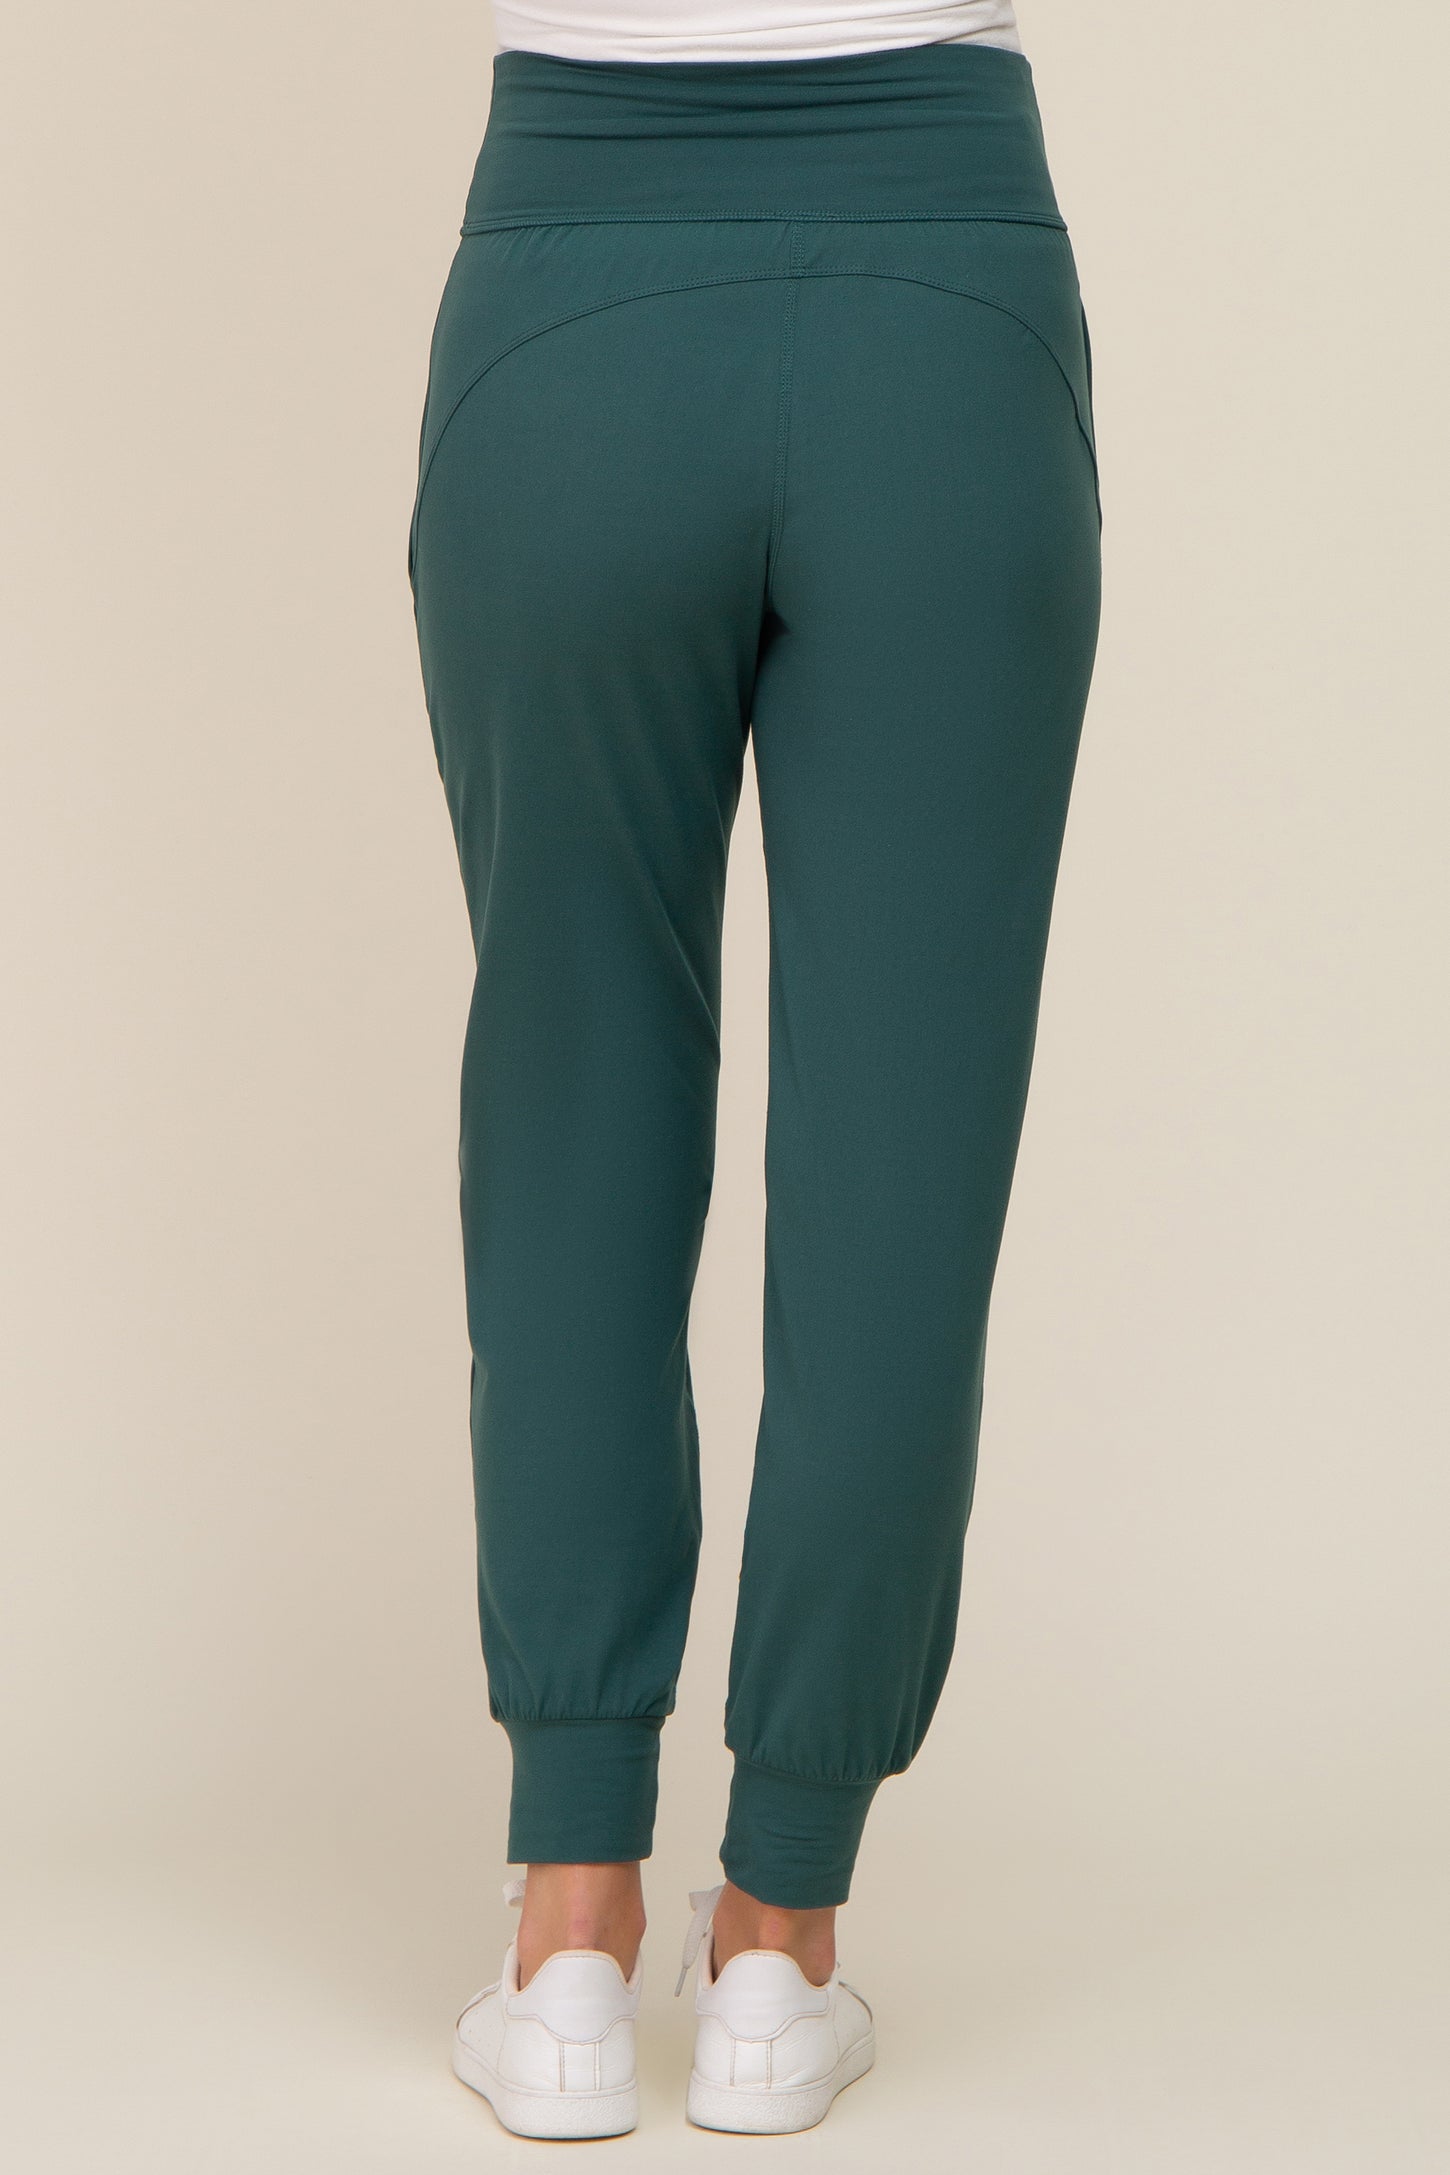 Teal Maternity Joggers